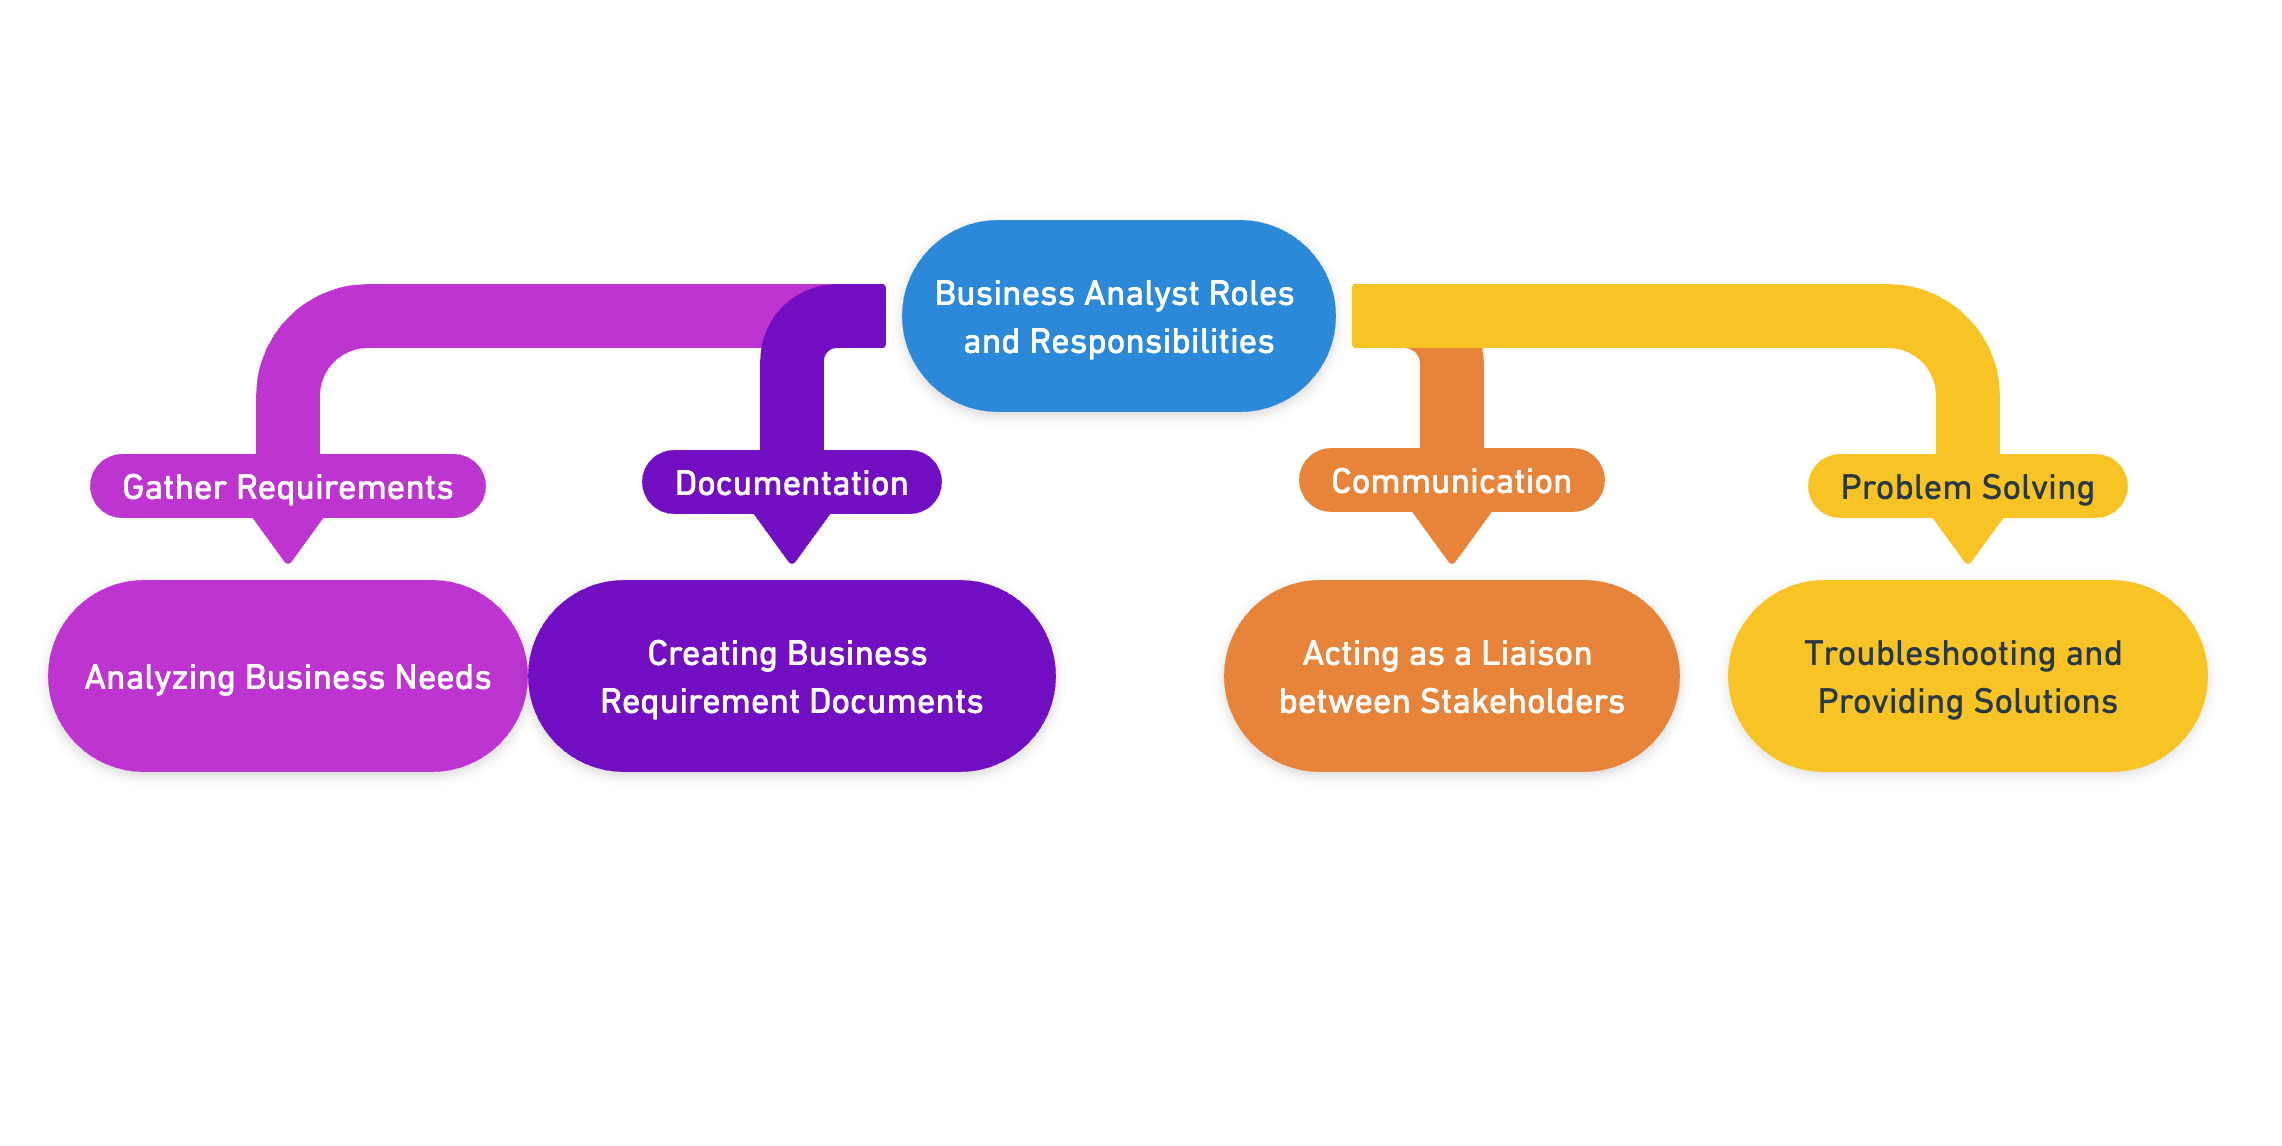 Business Analyst Roles and Responsibilities